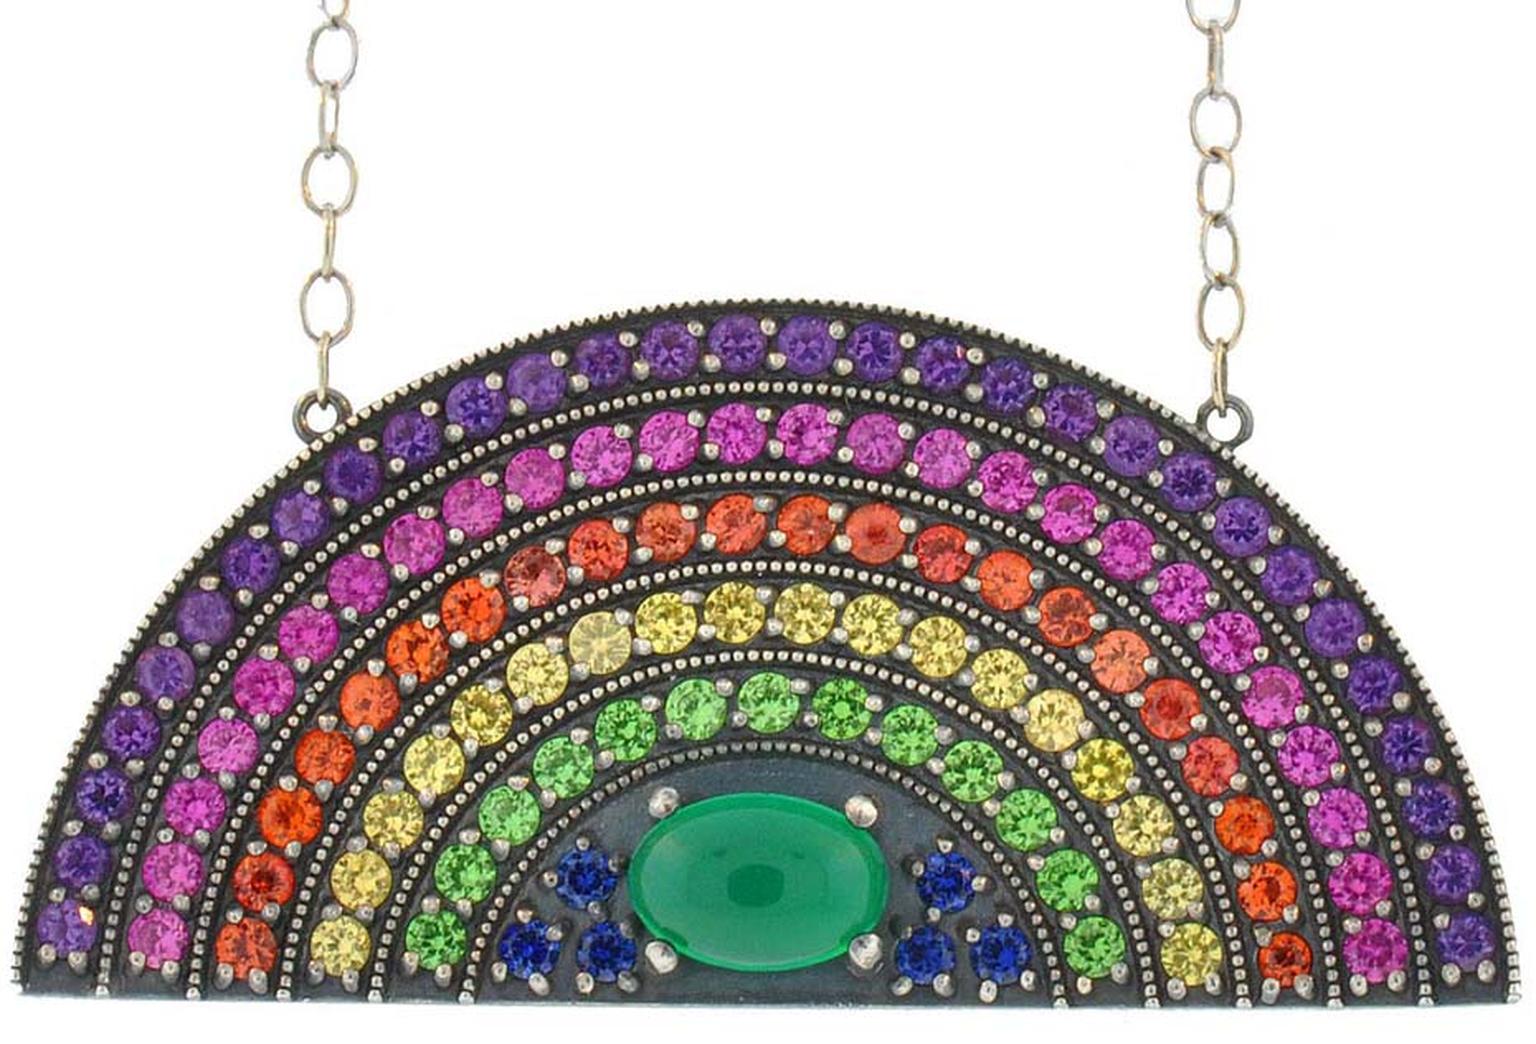 Andrea Fohrman rainbow pendant with stripes of coloured stones arched over a cabochon-cut green onyx. $5,500.